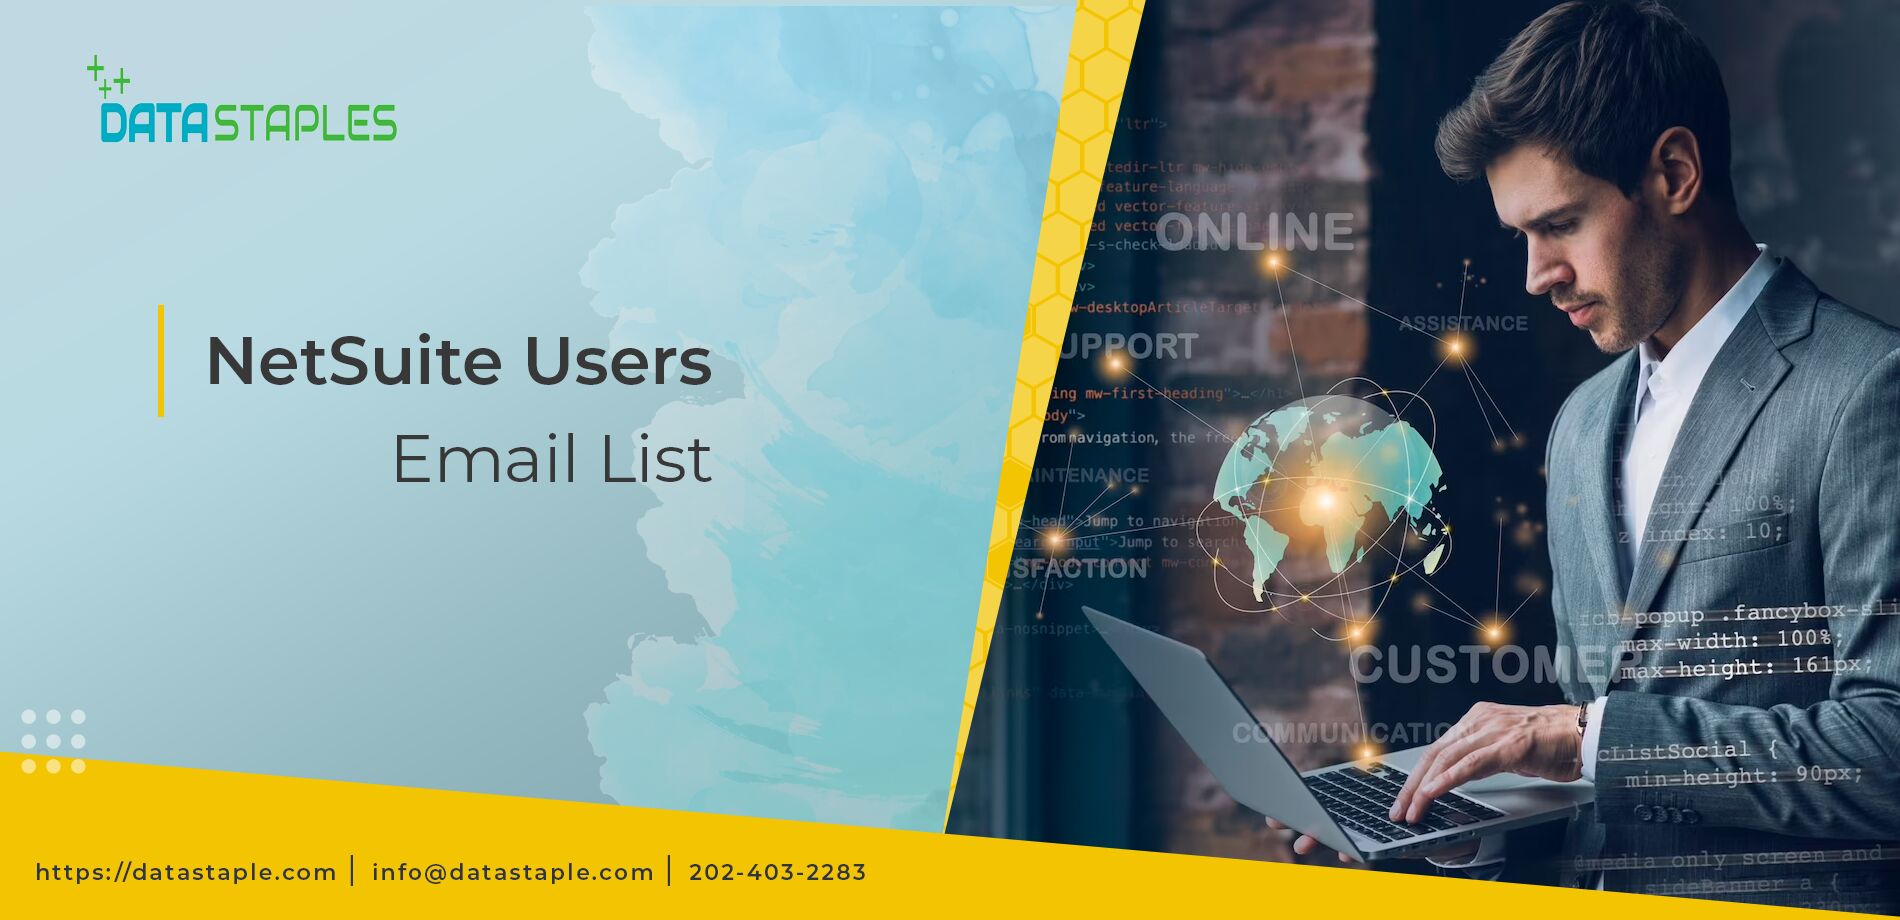 Netsuite Users Email List | DataStaples